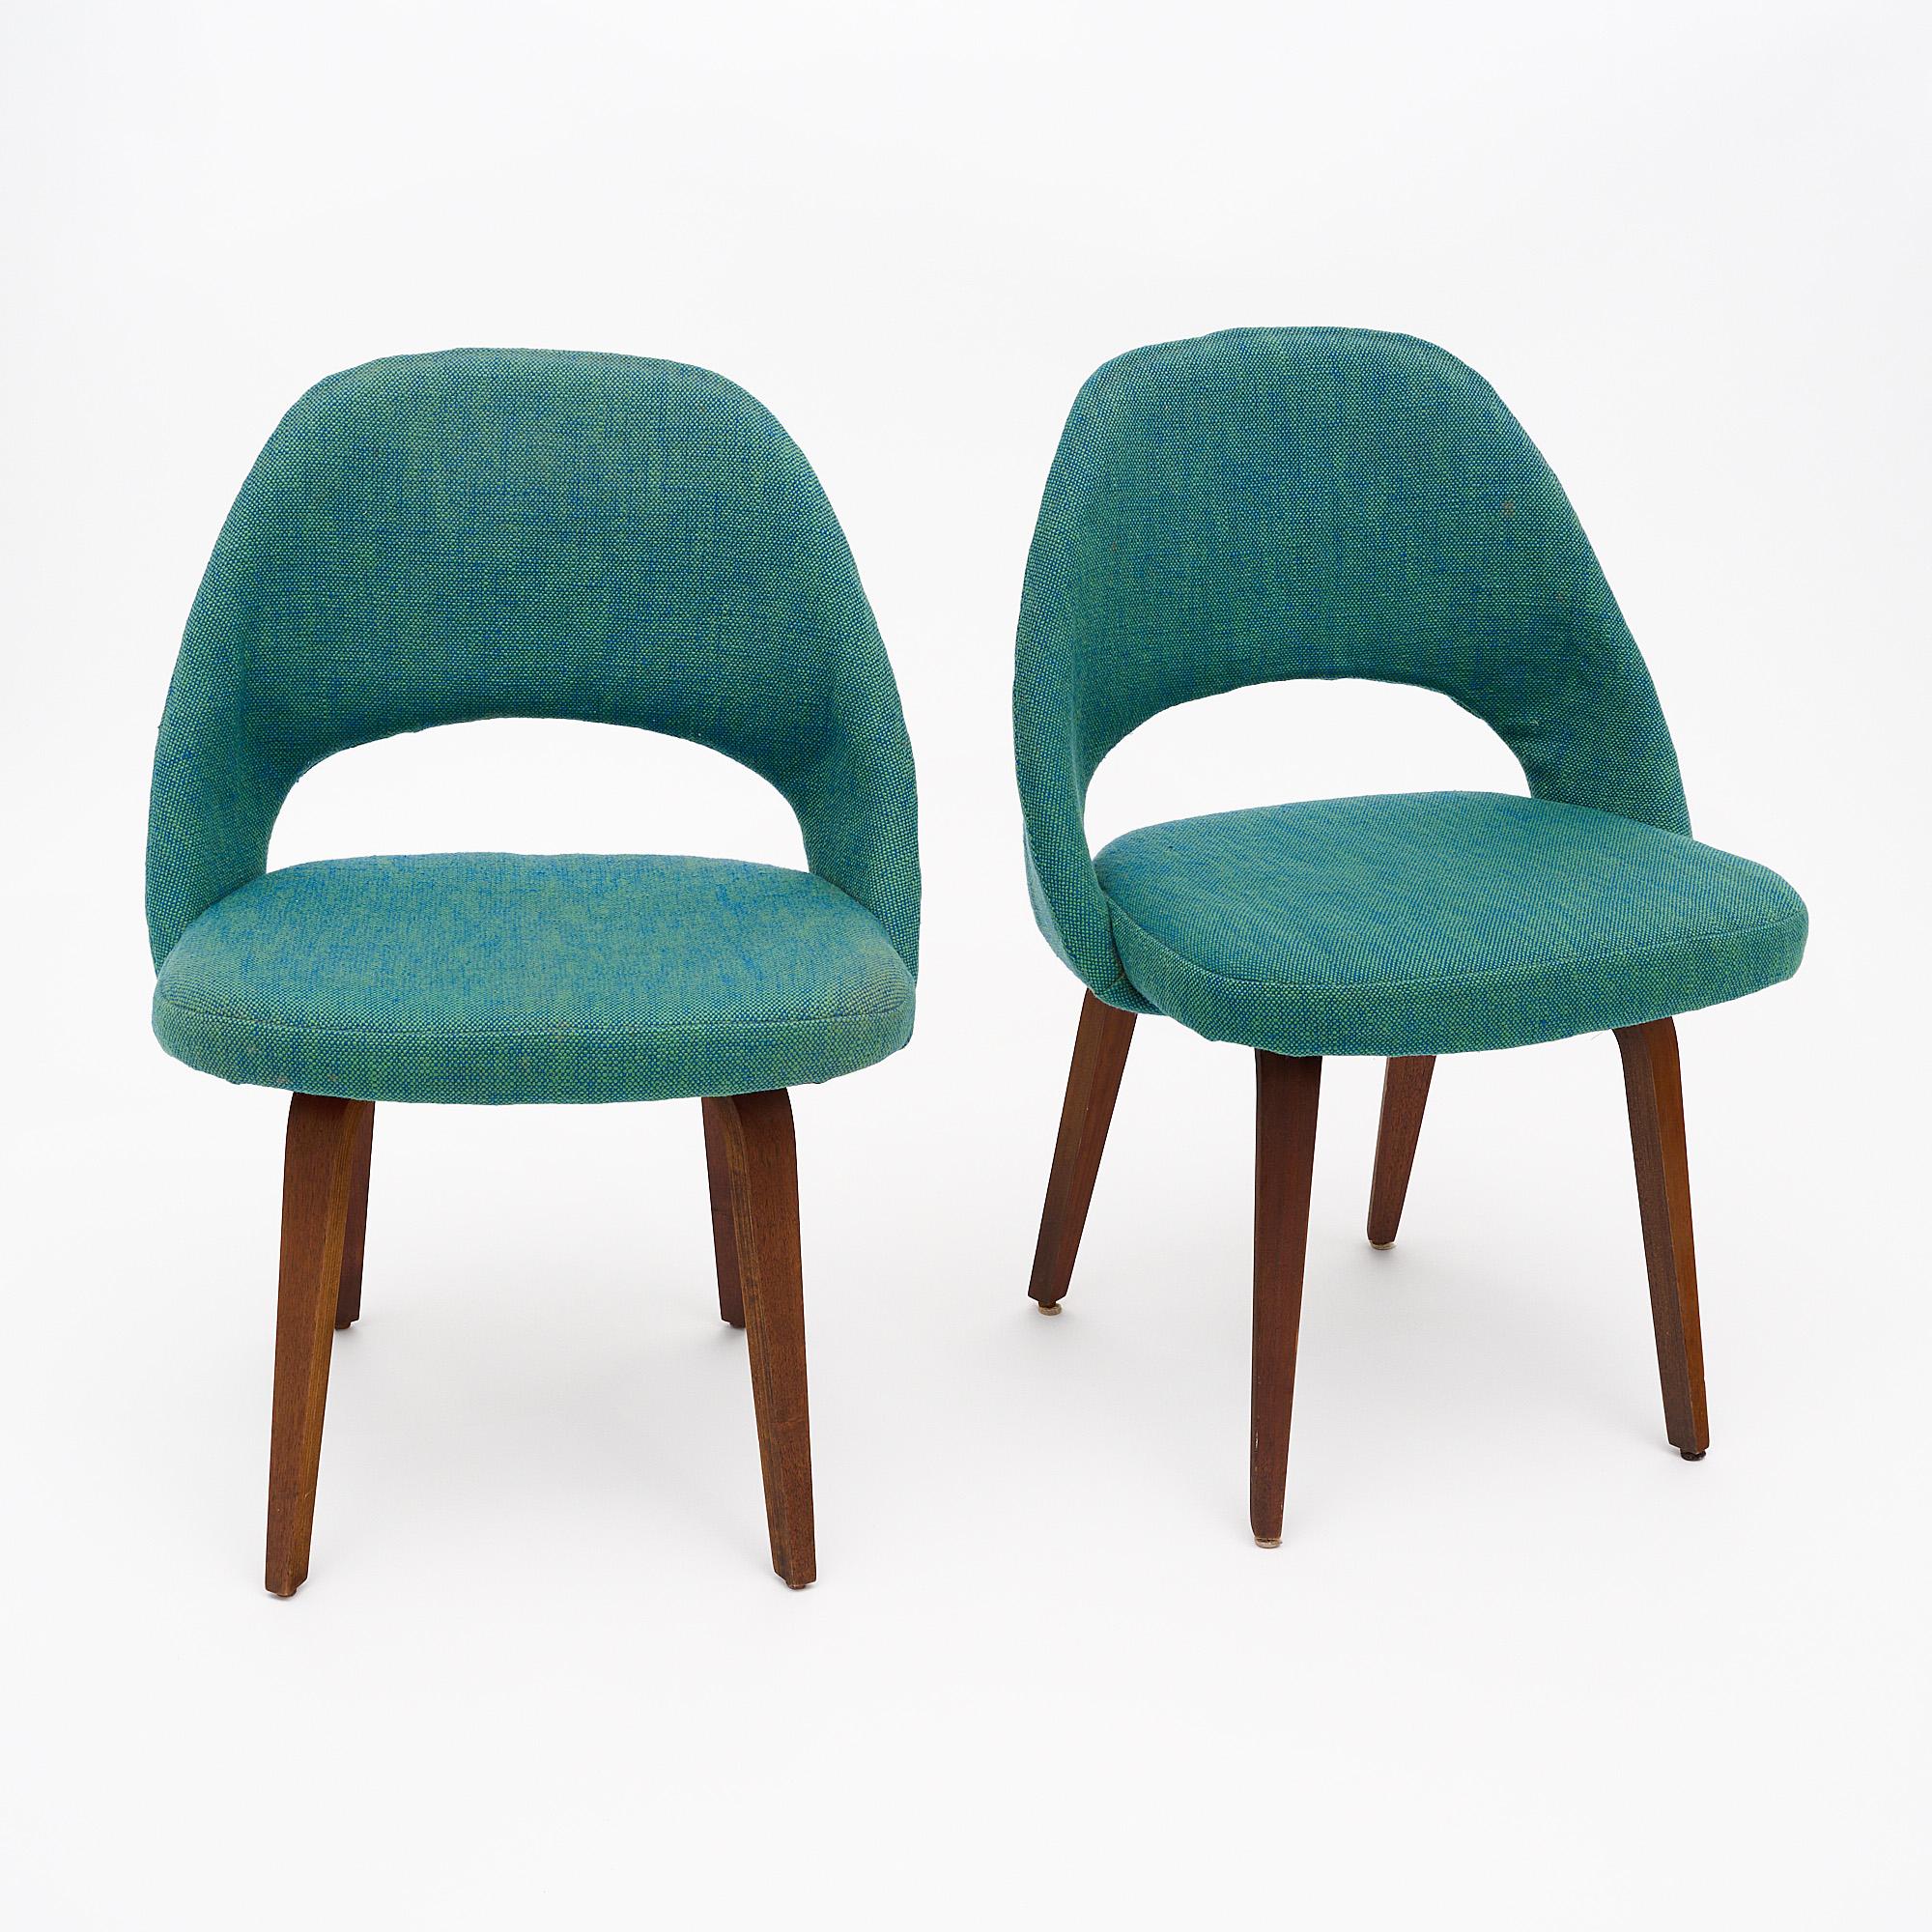 Pair of chairs by Knoll with original green and blue woven fabric in good condition. Originally featured in almost all of the Florence Knoll’s interiors, the Sarrinen Executive chair has remained a popular design. The legs are walnut. Once chair